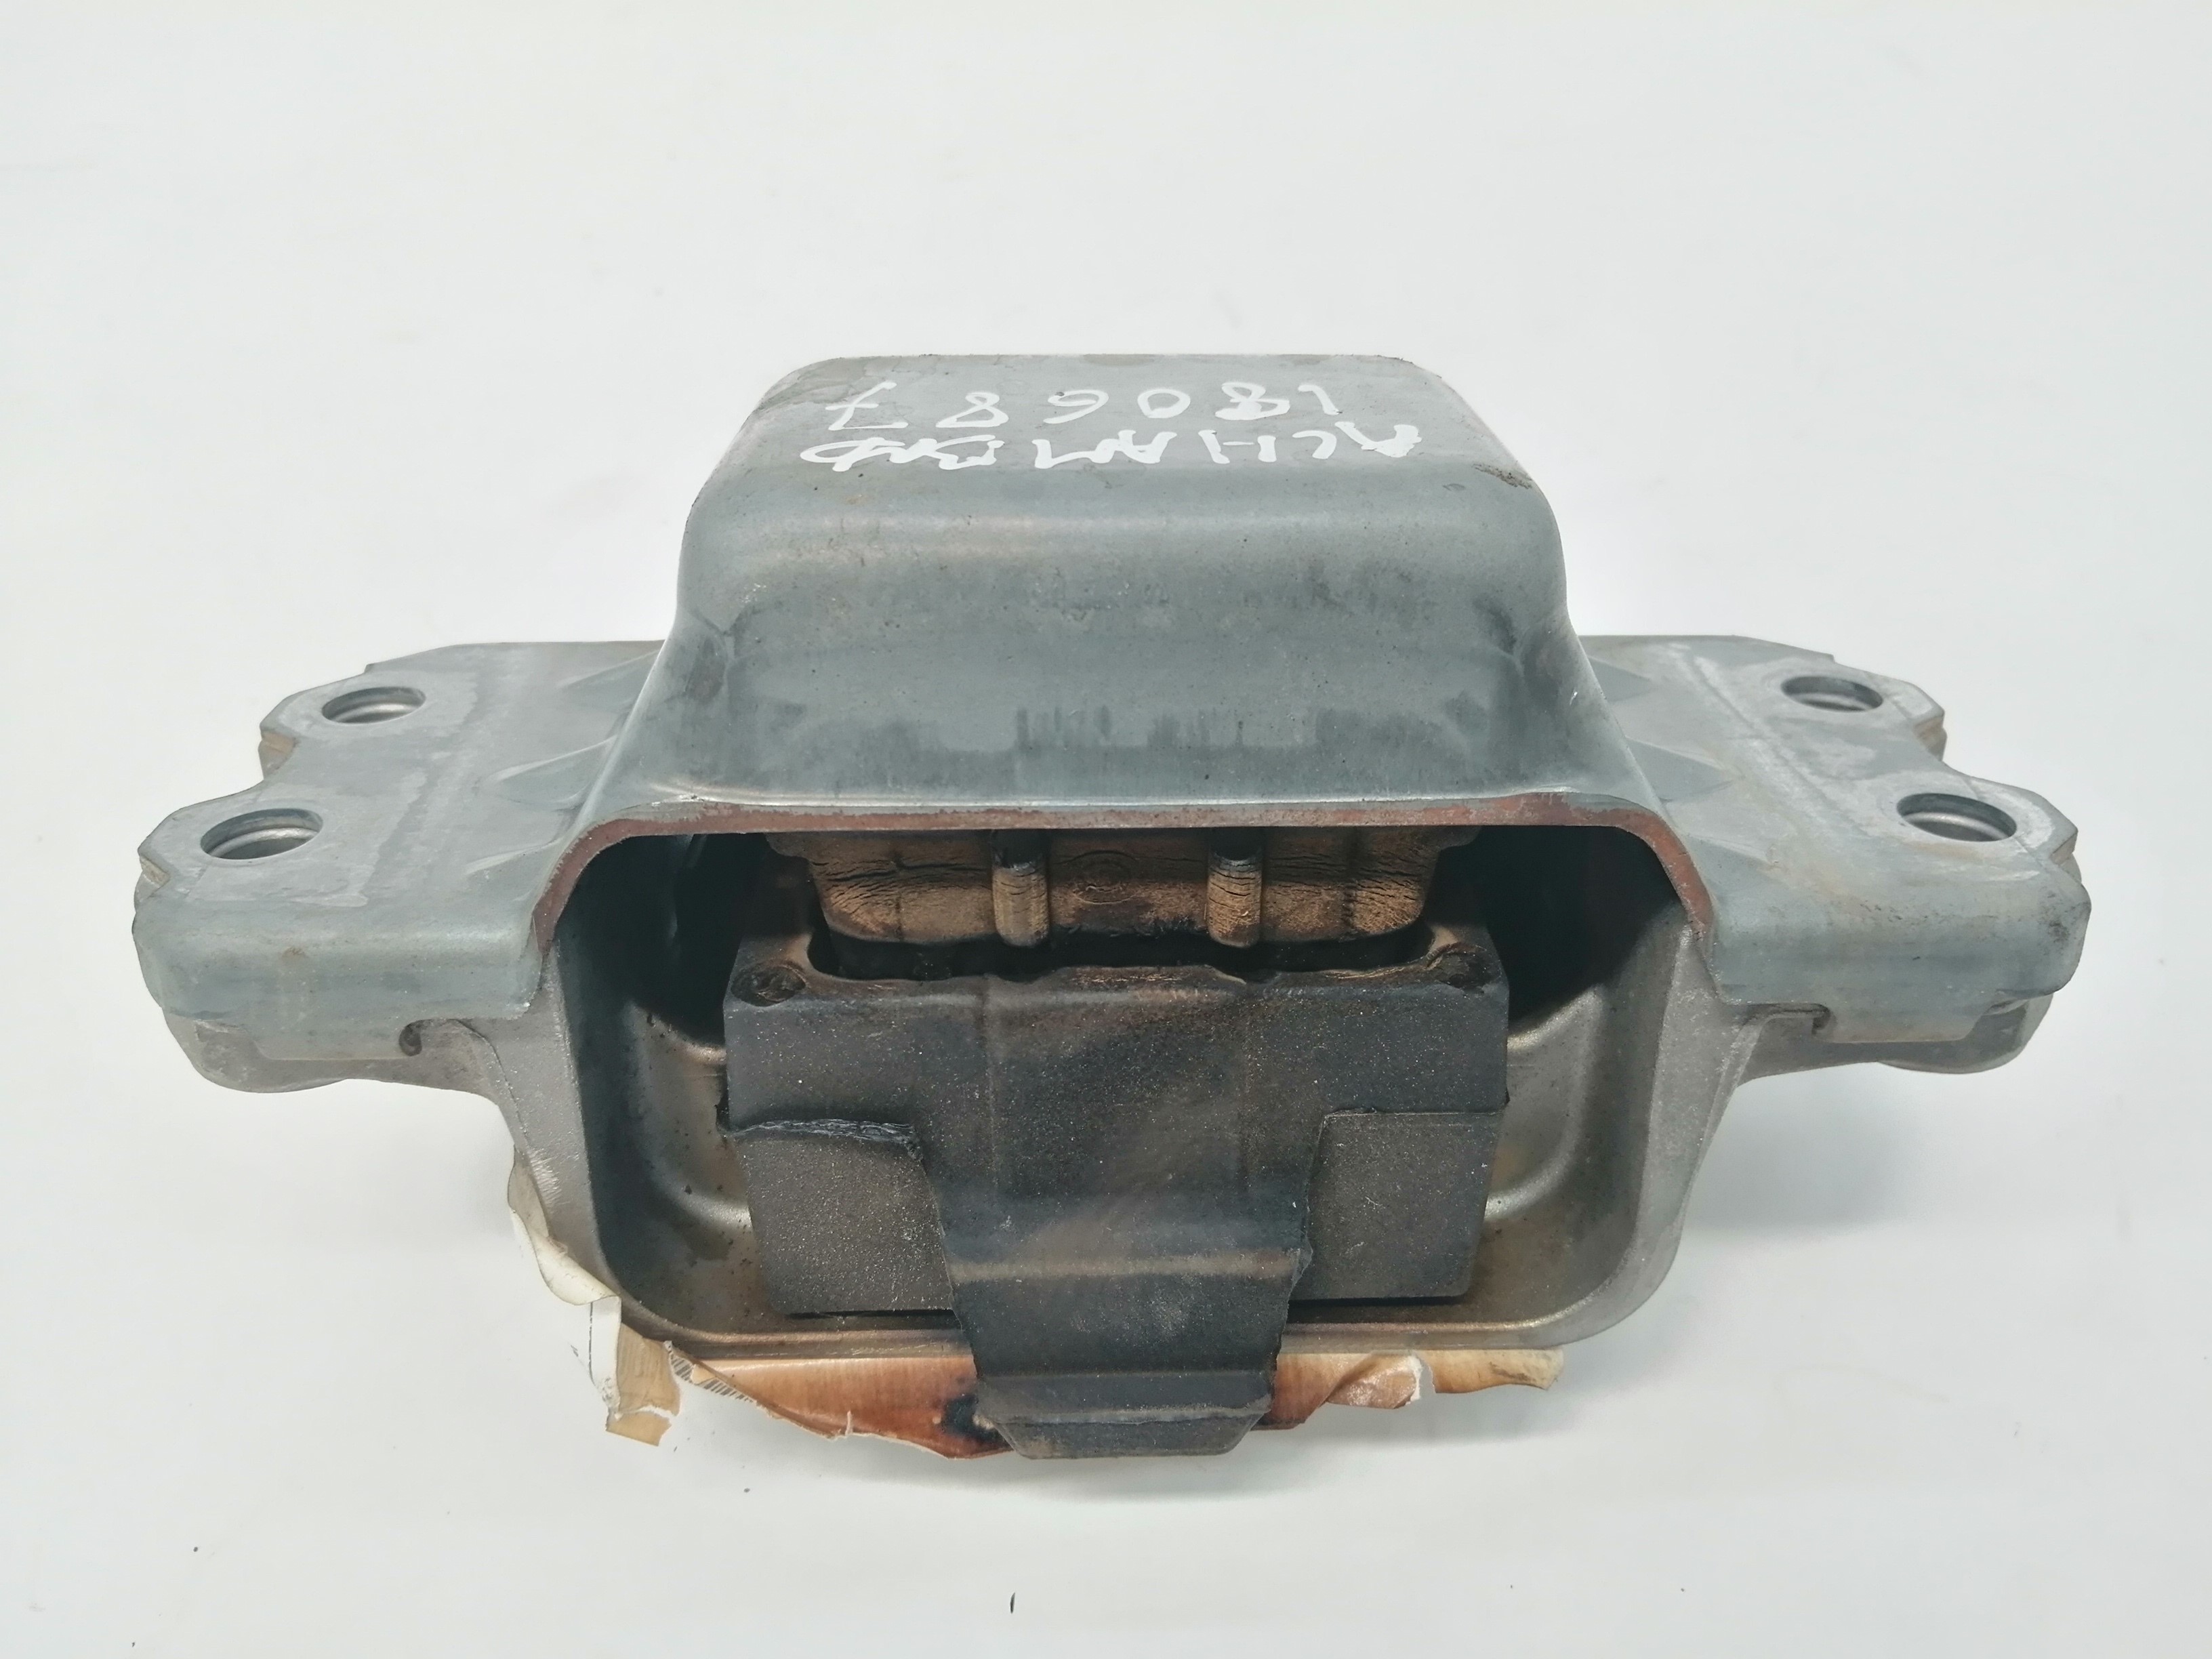 SEAT Alhambra 1 generation (1996-2010) Other Engine Compartment Parts 5N0199262F, 5N0199262F 21646634